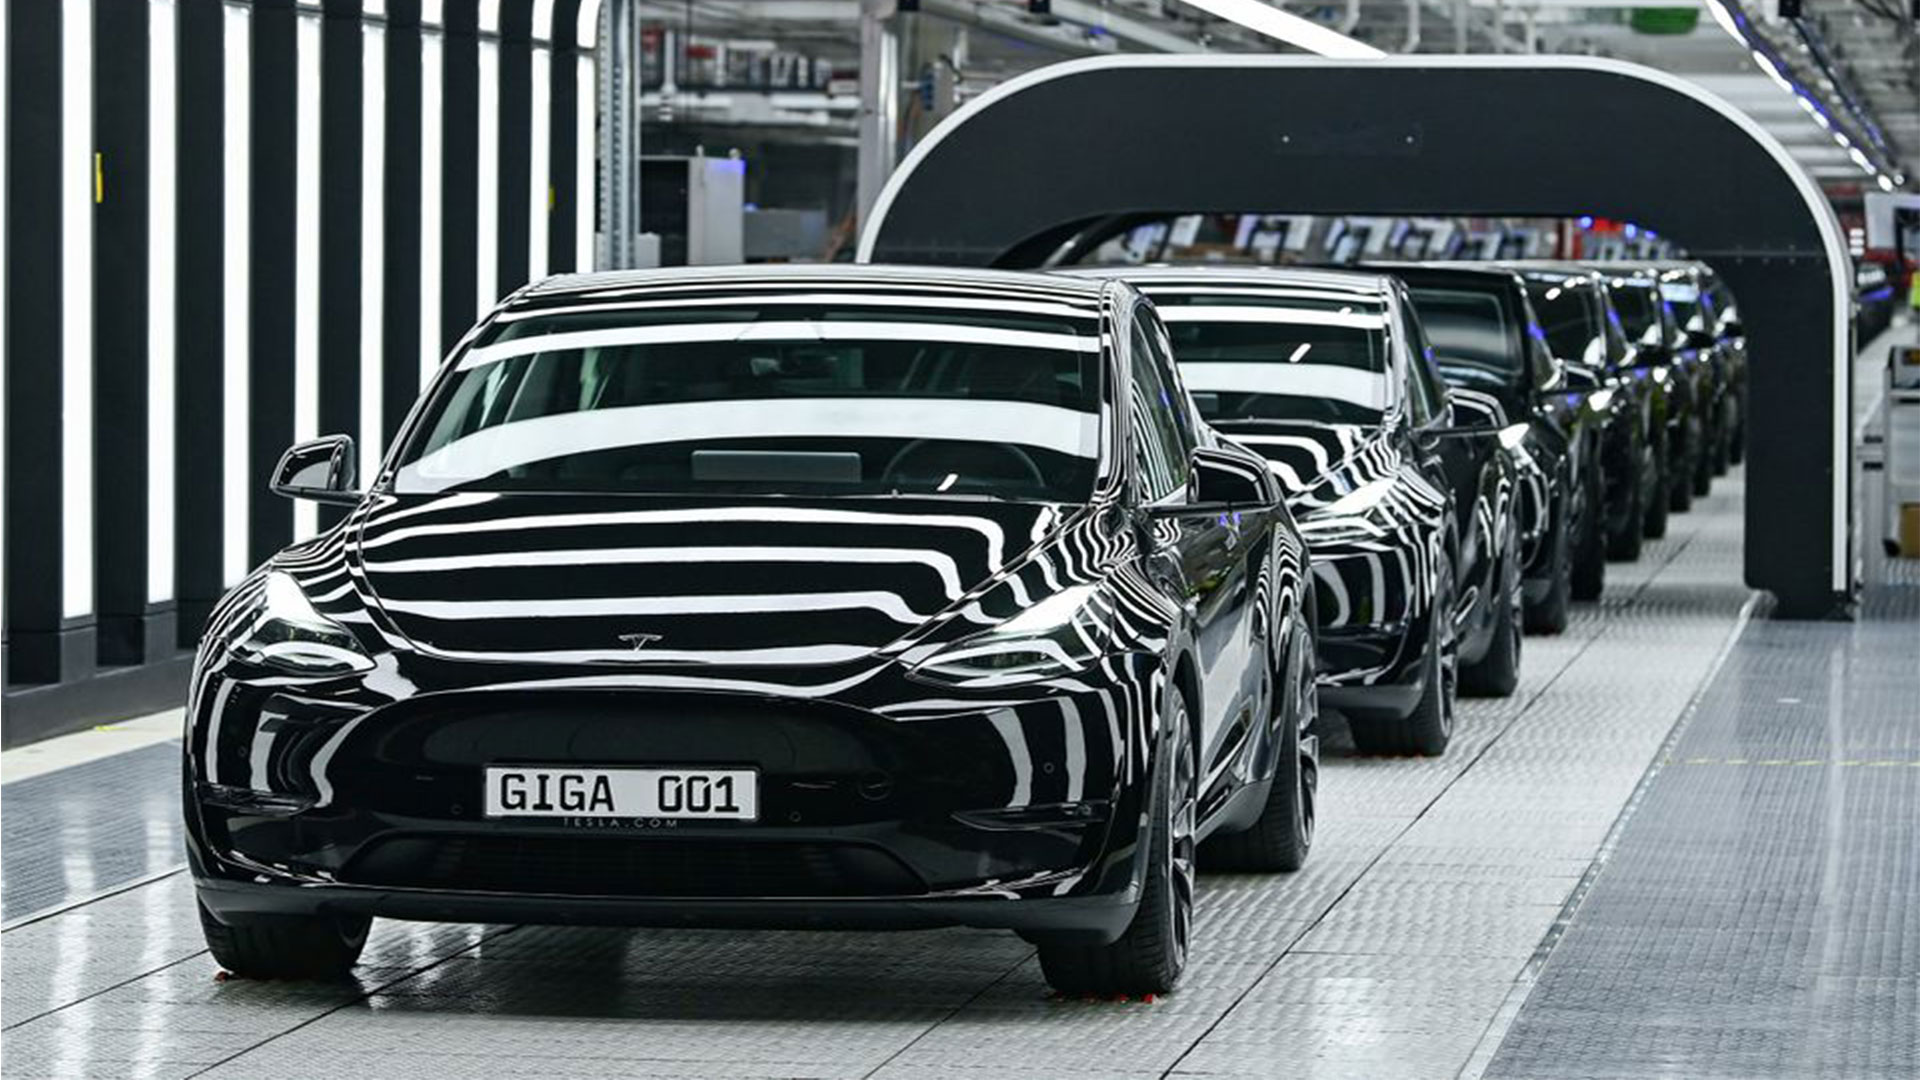  Model Y cars are pictured during the opening ceremony of the new Tesla Gigafactory for electric cars in Gruenheide, Germany, March 22, 2022. Patrick Pleul/Pool via REUTERS